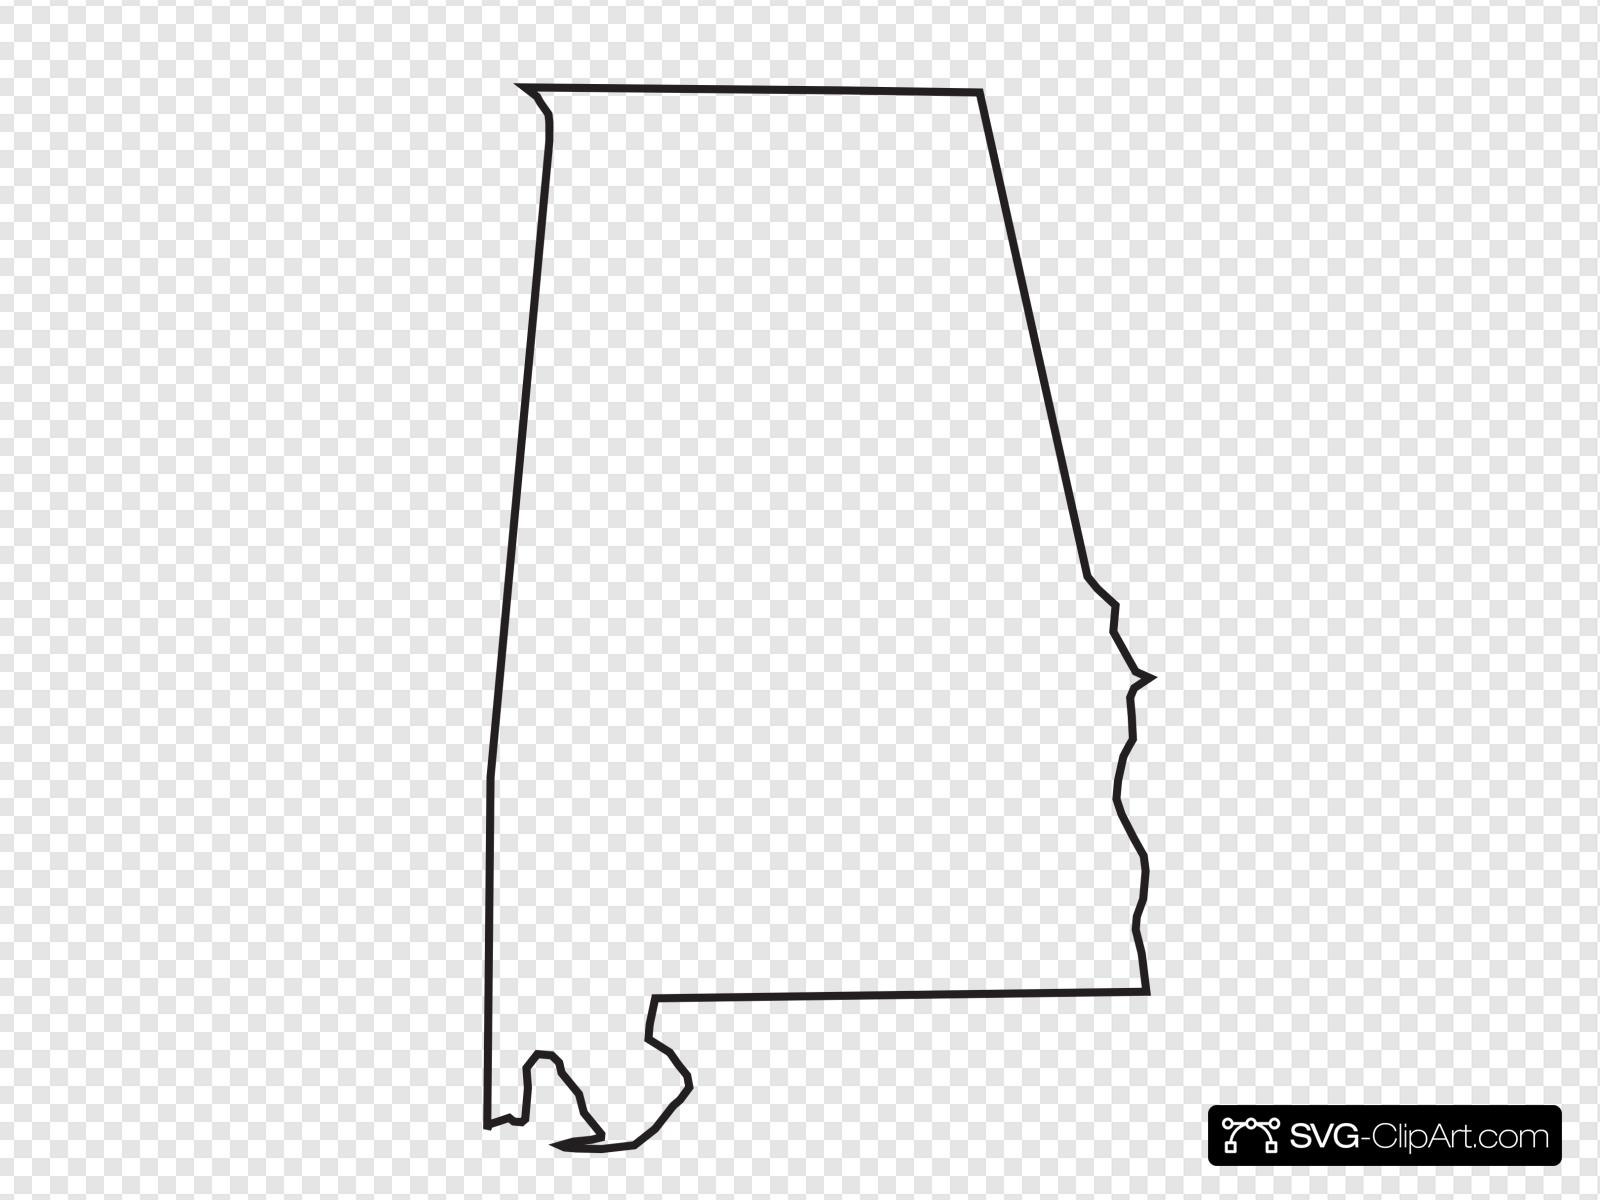 Alabama clipart outline. Clip art icon and